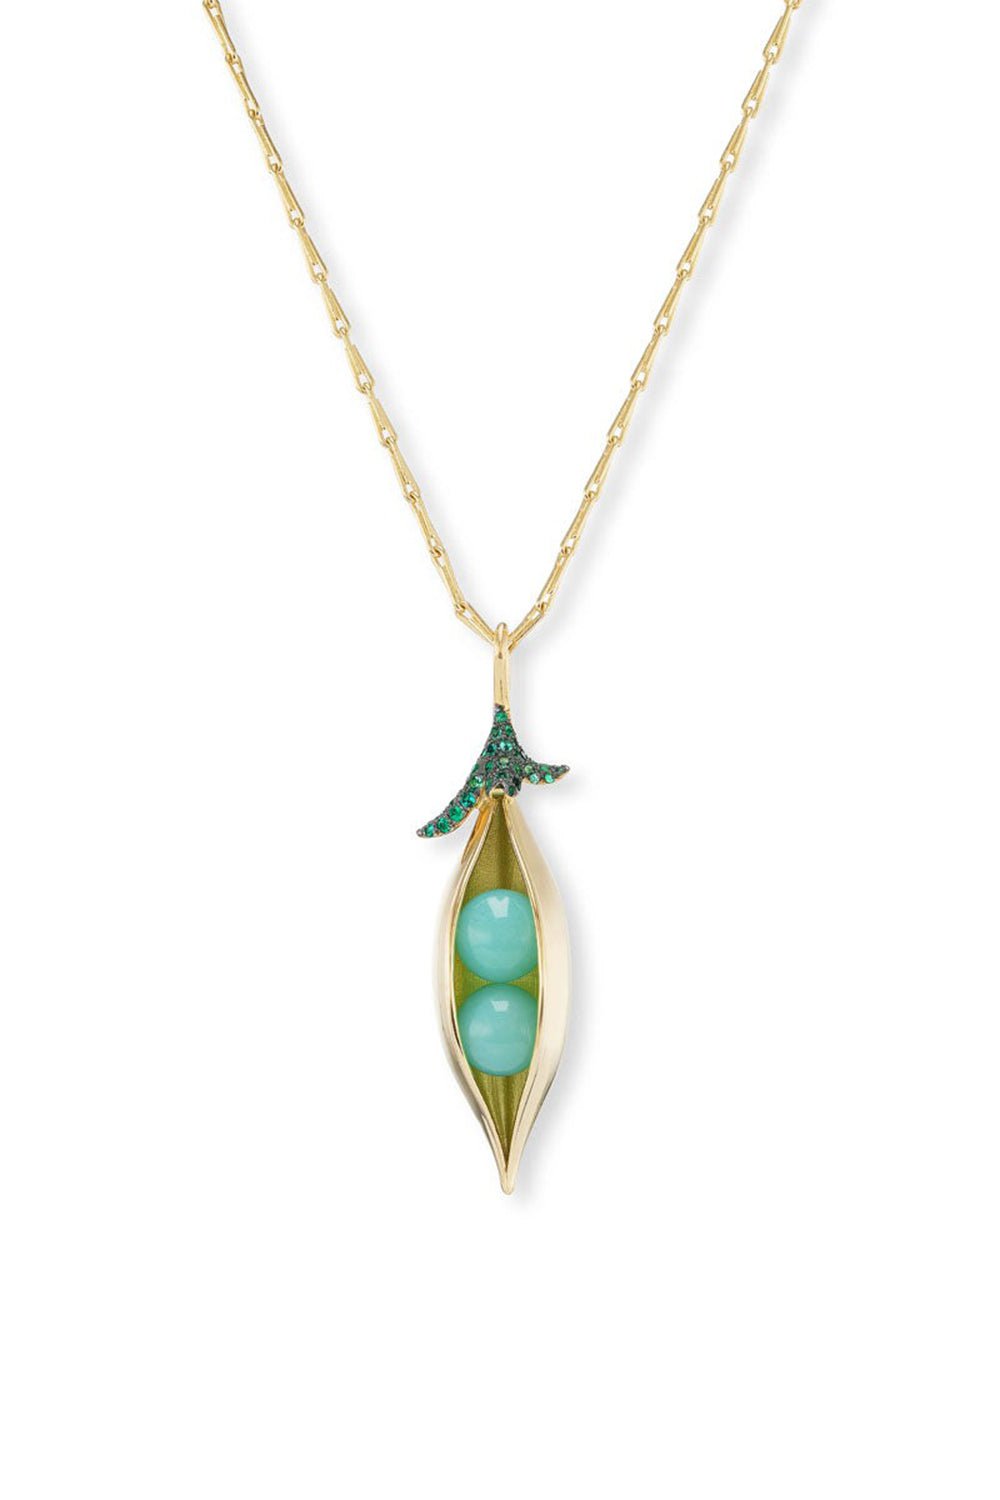 BRENT NEALE-Two Sweet Peas Pendant Necklace-YELLOW GOLD